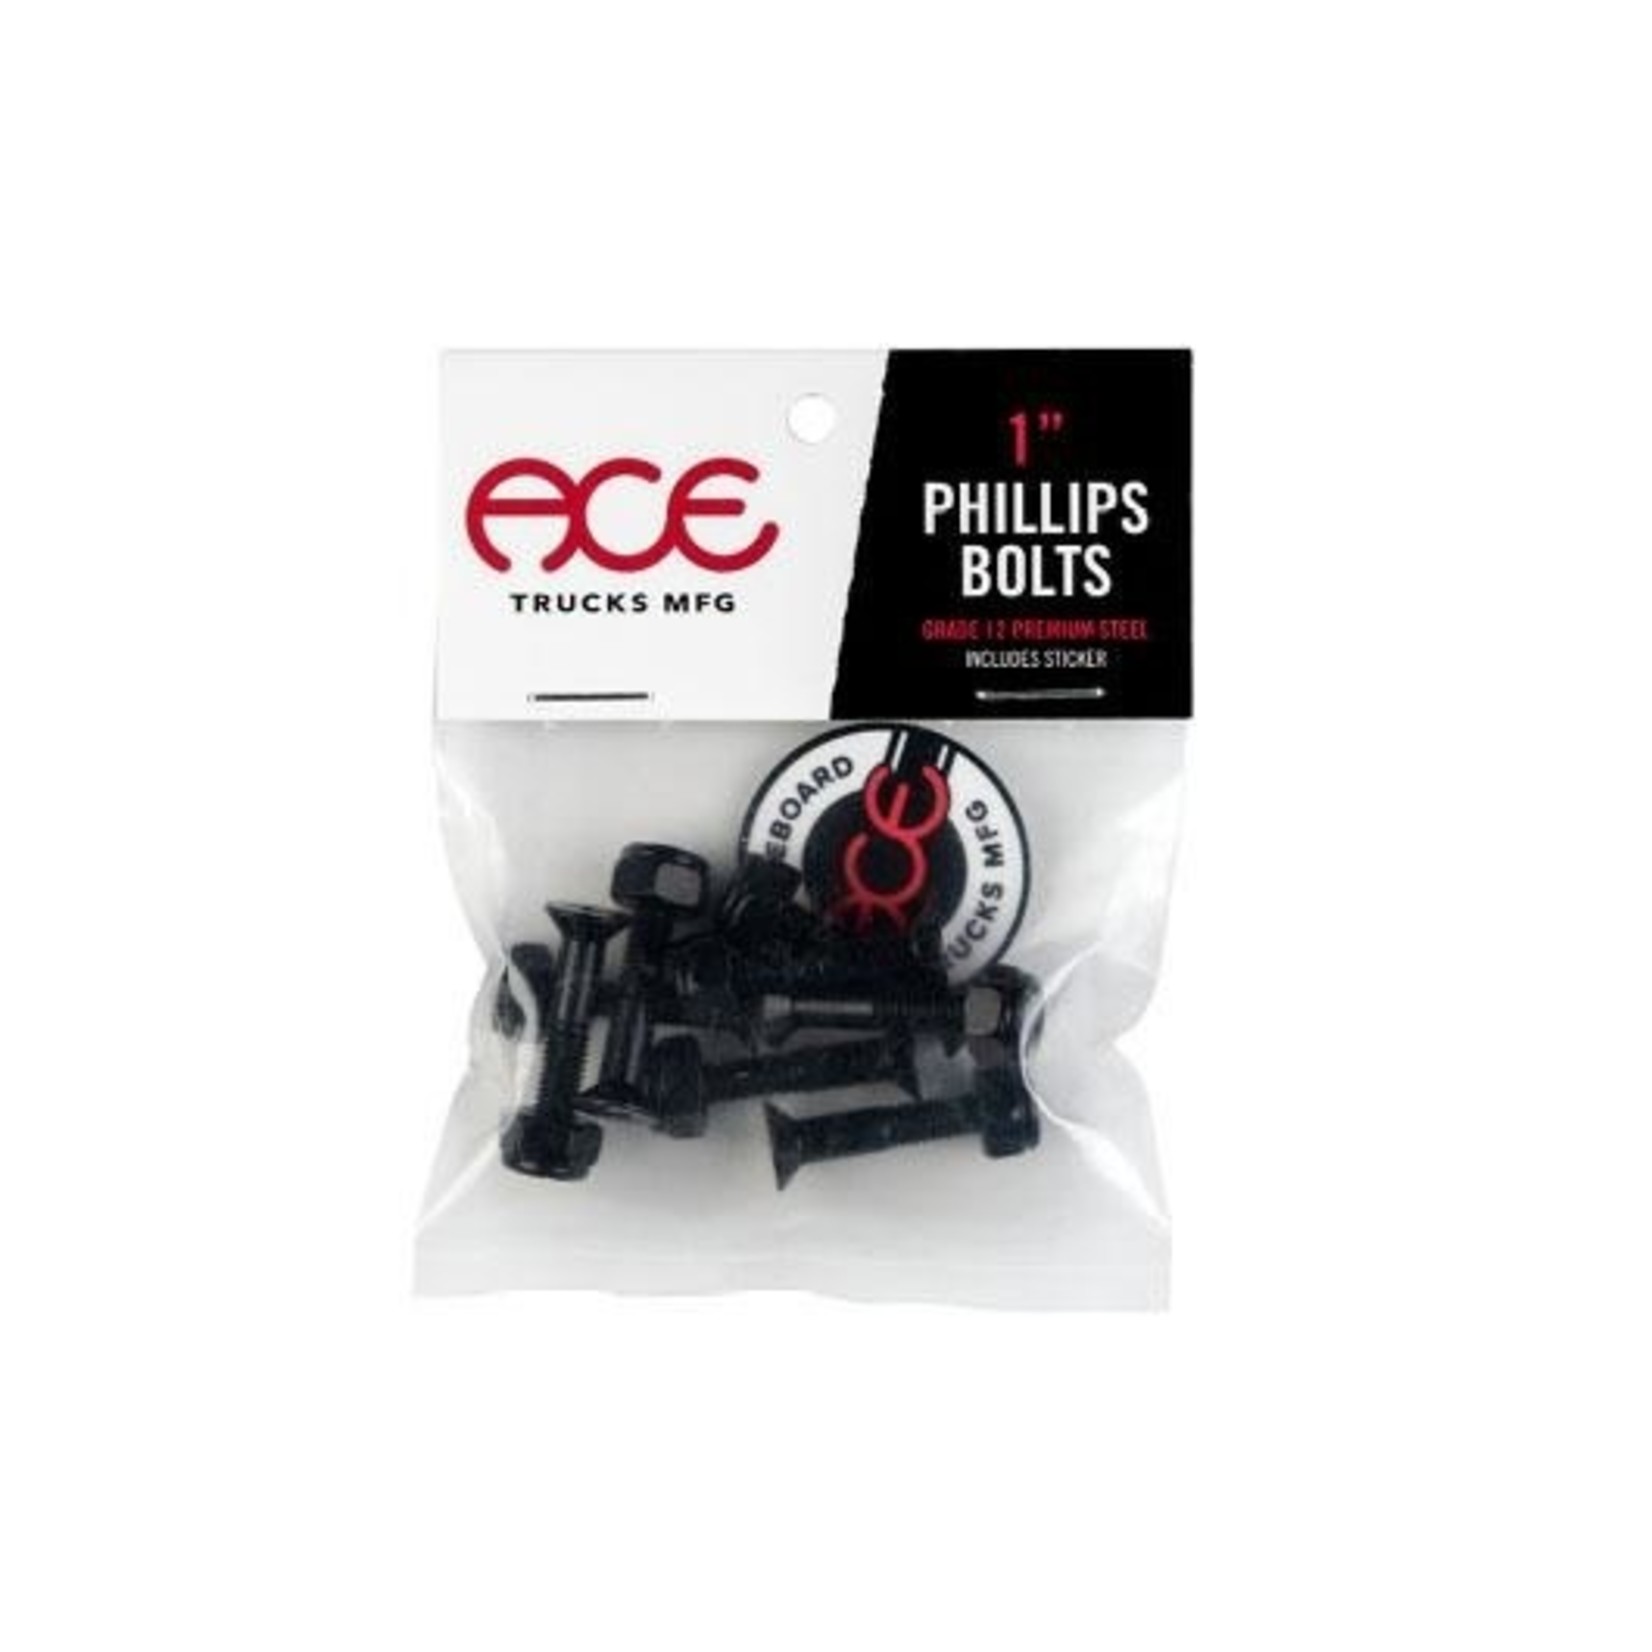 ACE BOLTS PHILLIPS 1"